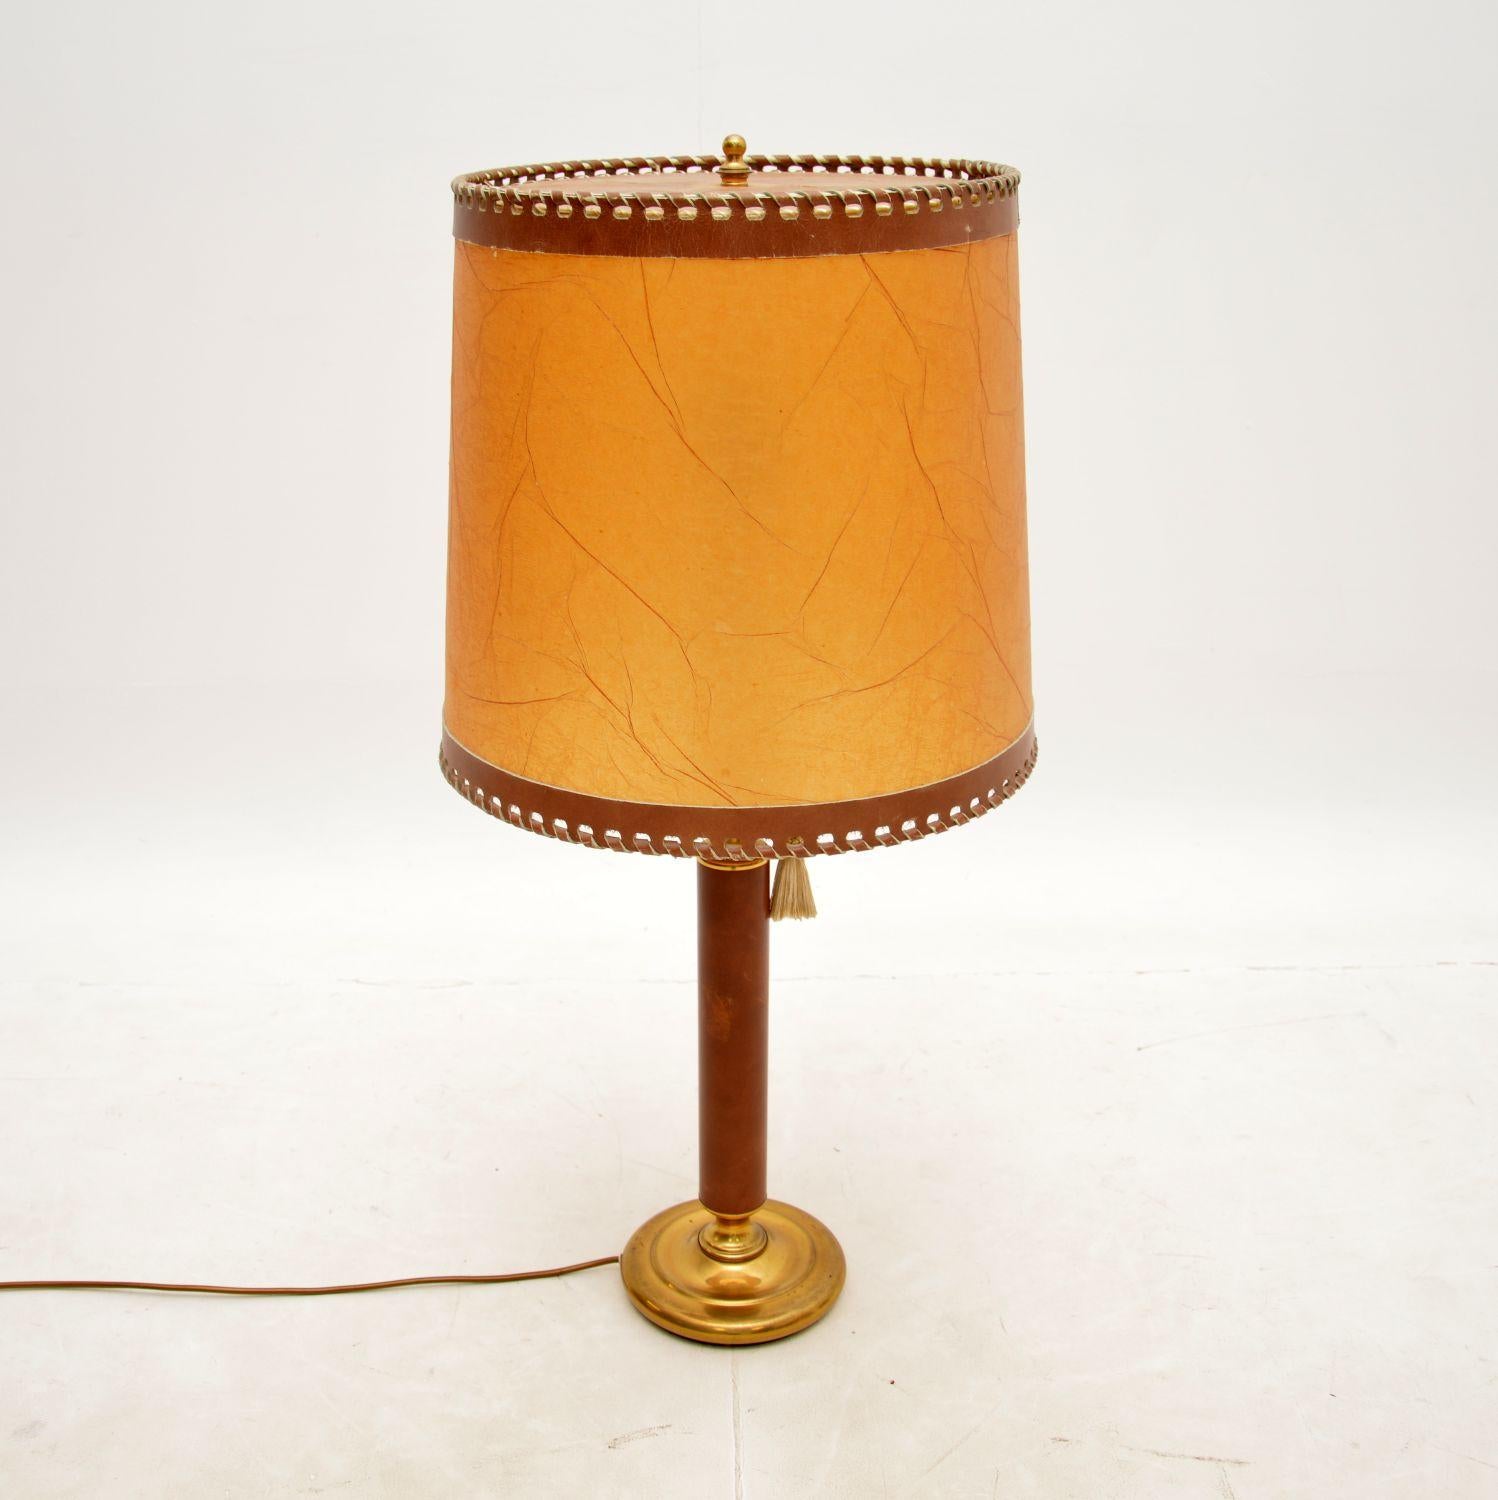 A very large and impressive vintage leather and brass table lamp. This was made in France, it dates from around the 1970’s.

The quality is outstanding, this has a solid brass frame which is clad in high quality brown leather. The shade is